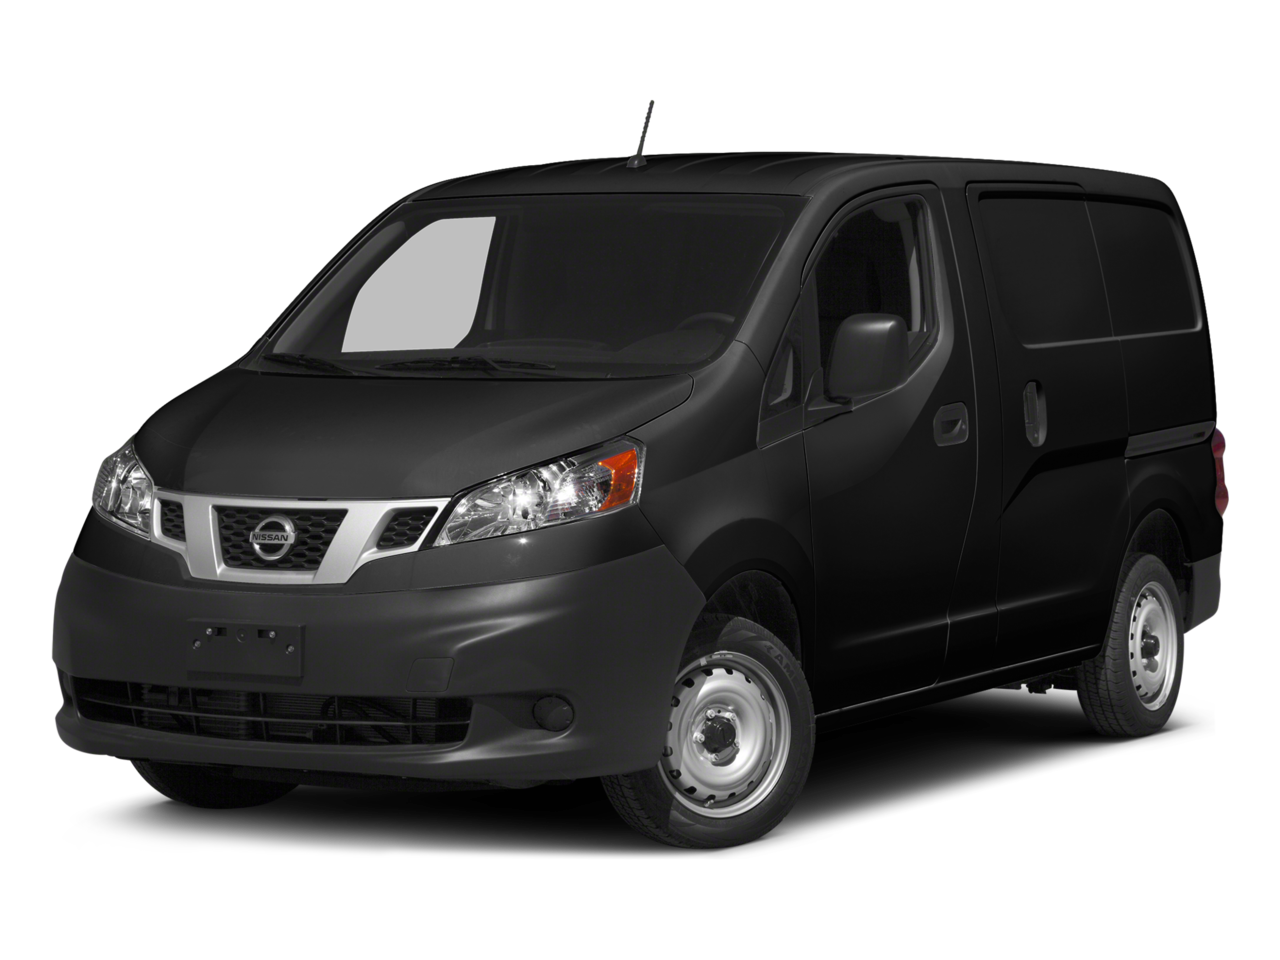 2017 Nissan NV200 Repair: Service and Maintenance Cost